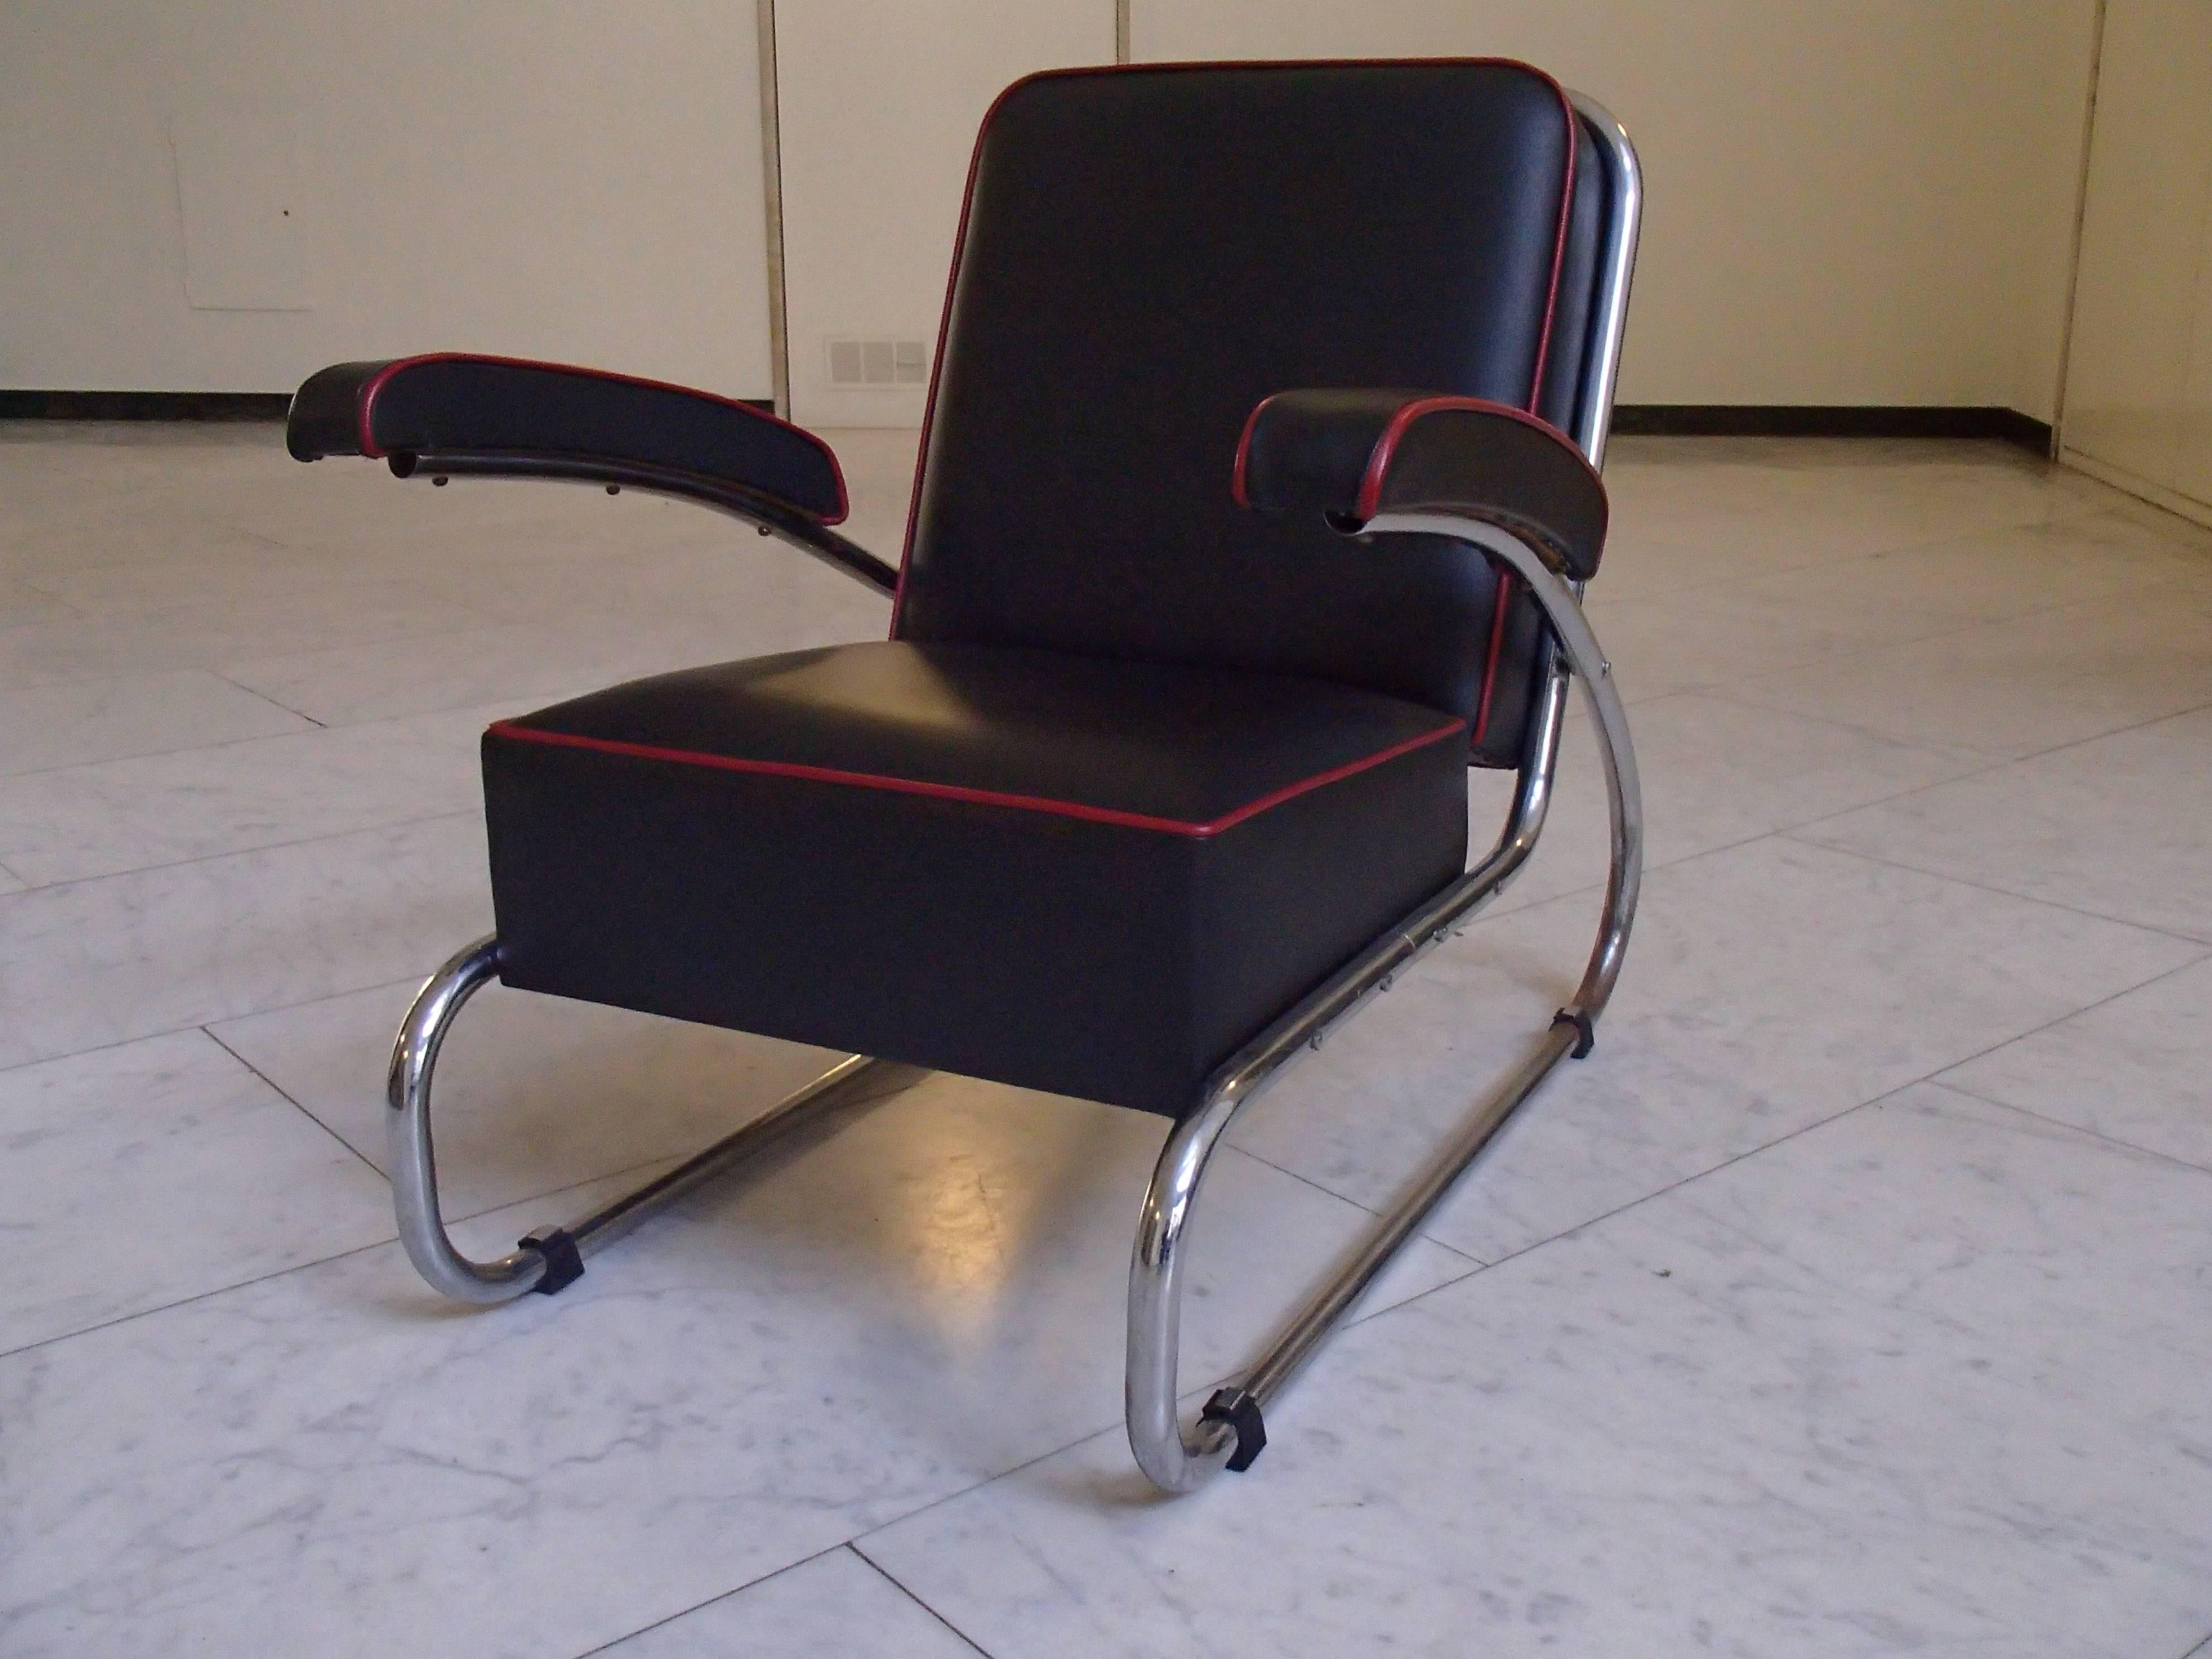 Pair of Bauhaus chrome black leather lounge chairs red by Gottwald. New reupholstered and recovered with leather. The chrome is in its original condition and shows wear on the legs.